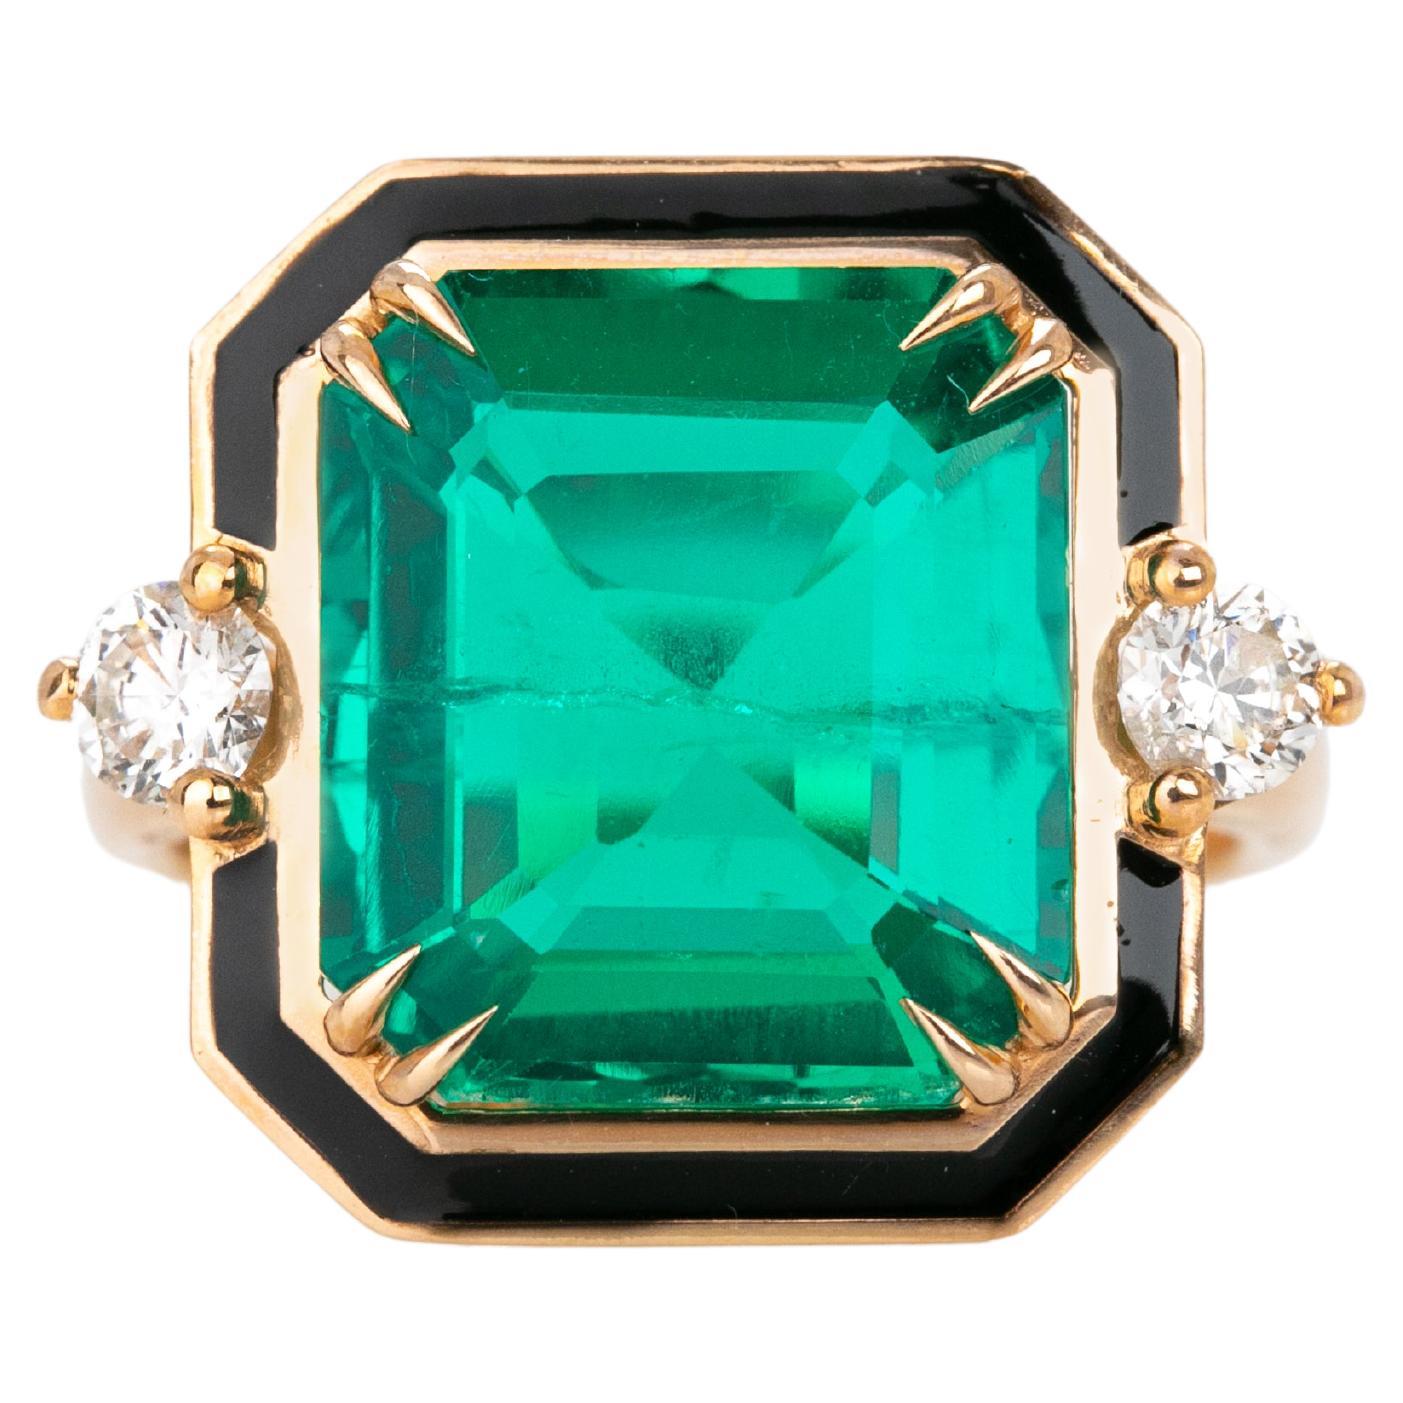 What is a synthetic emerald?